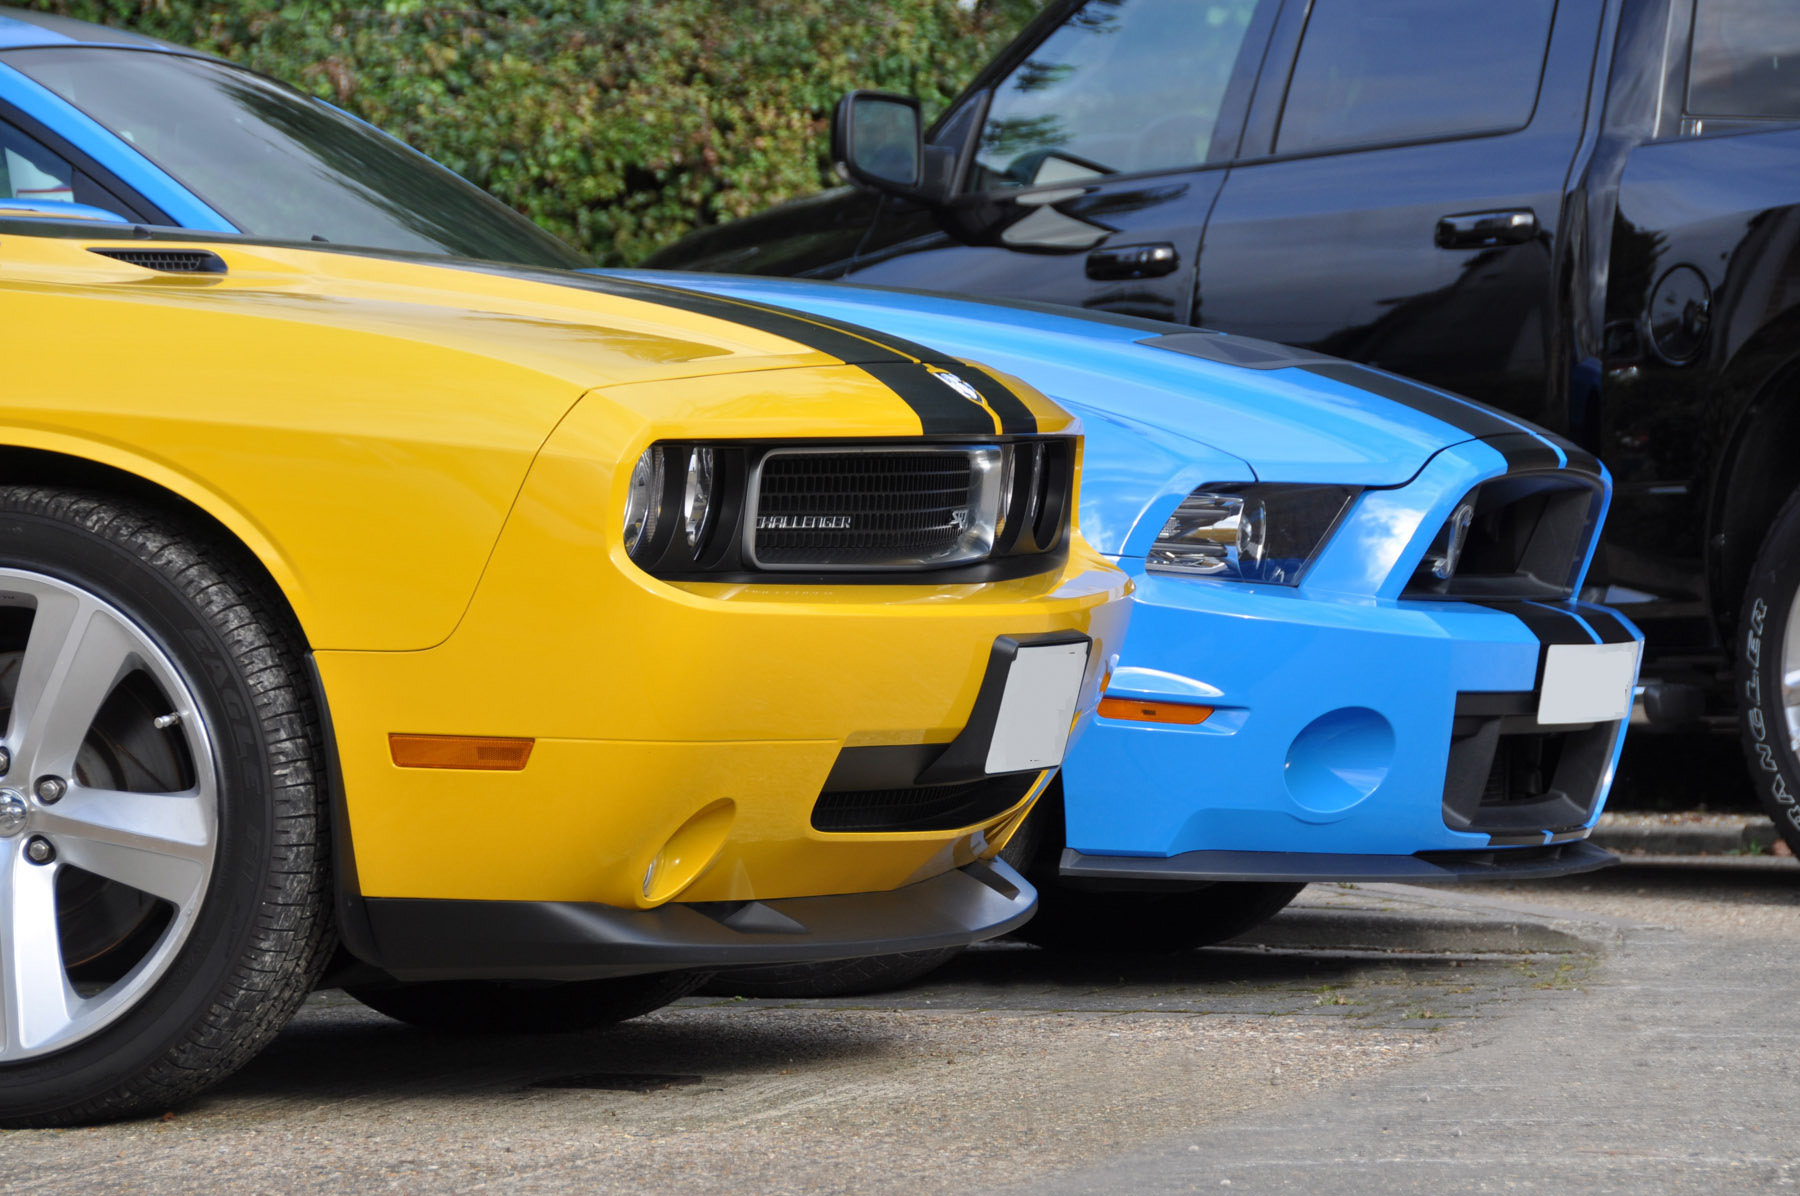 Challenger SRT8 and Mustang Shelby